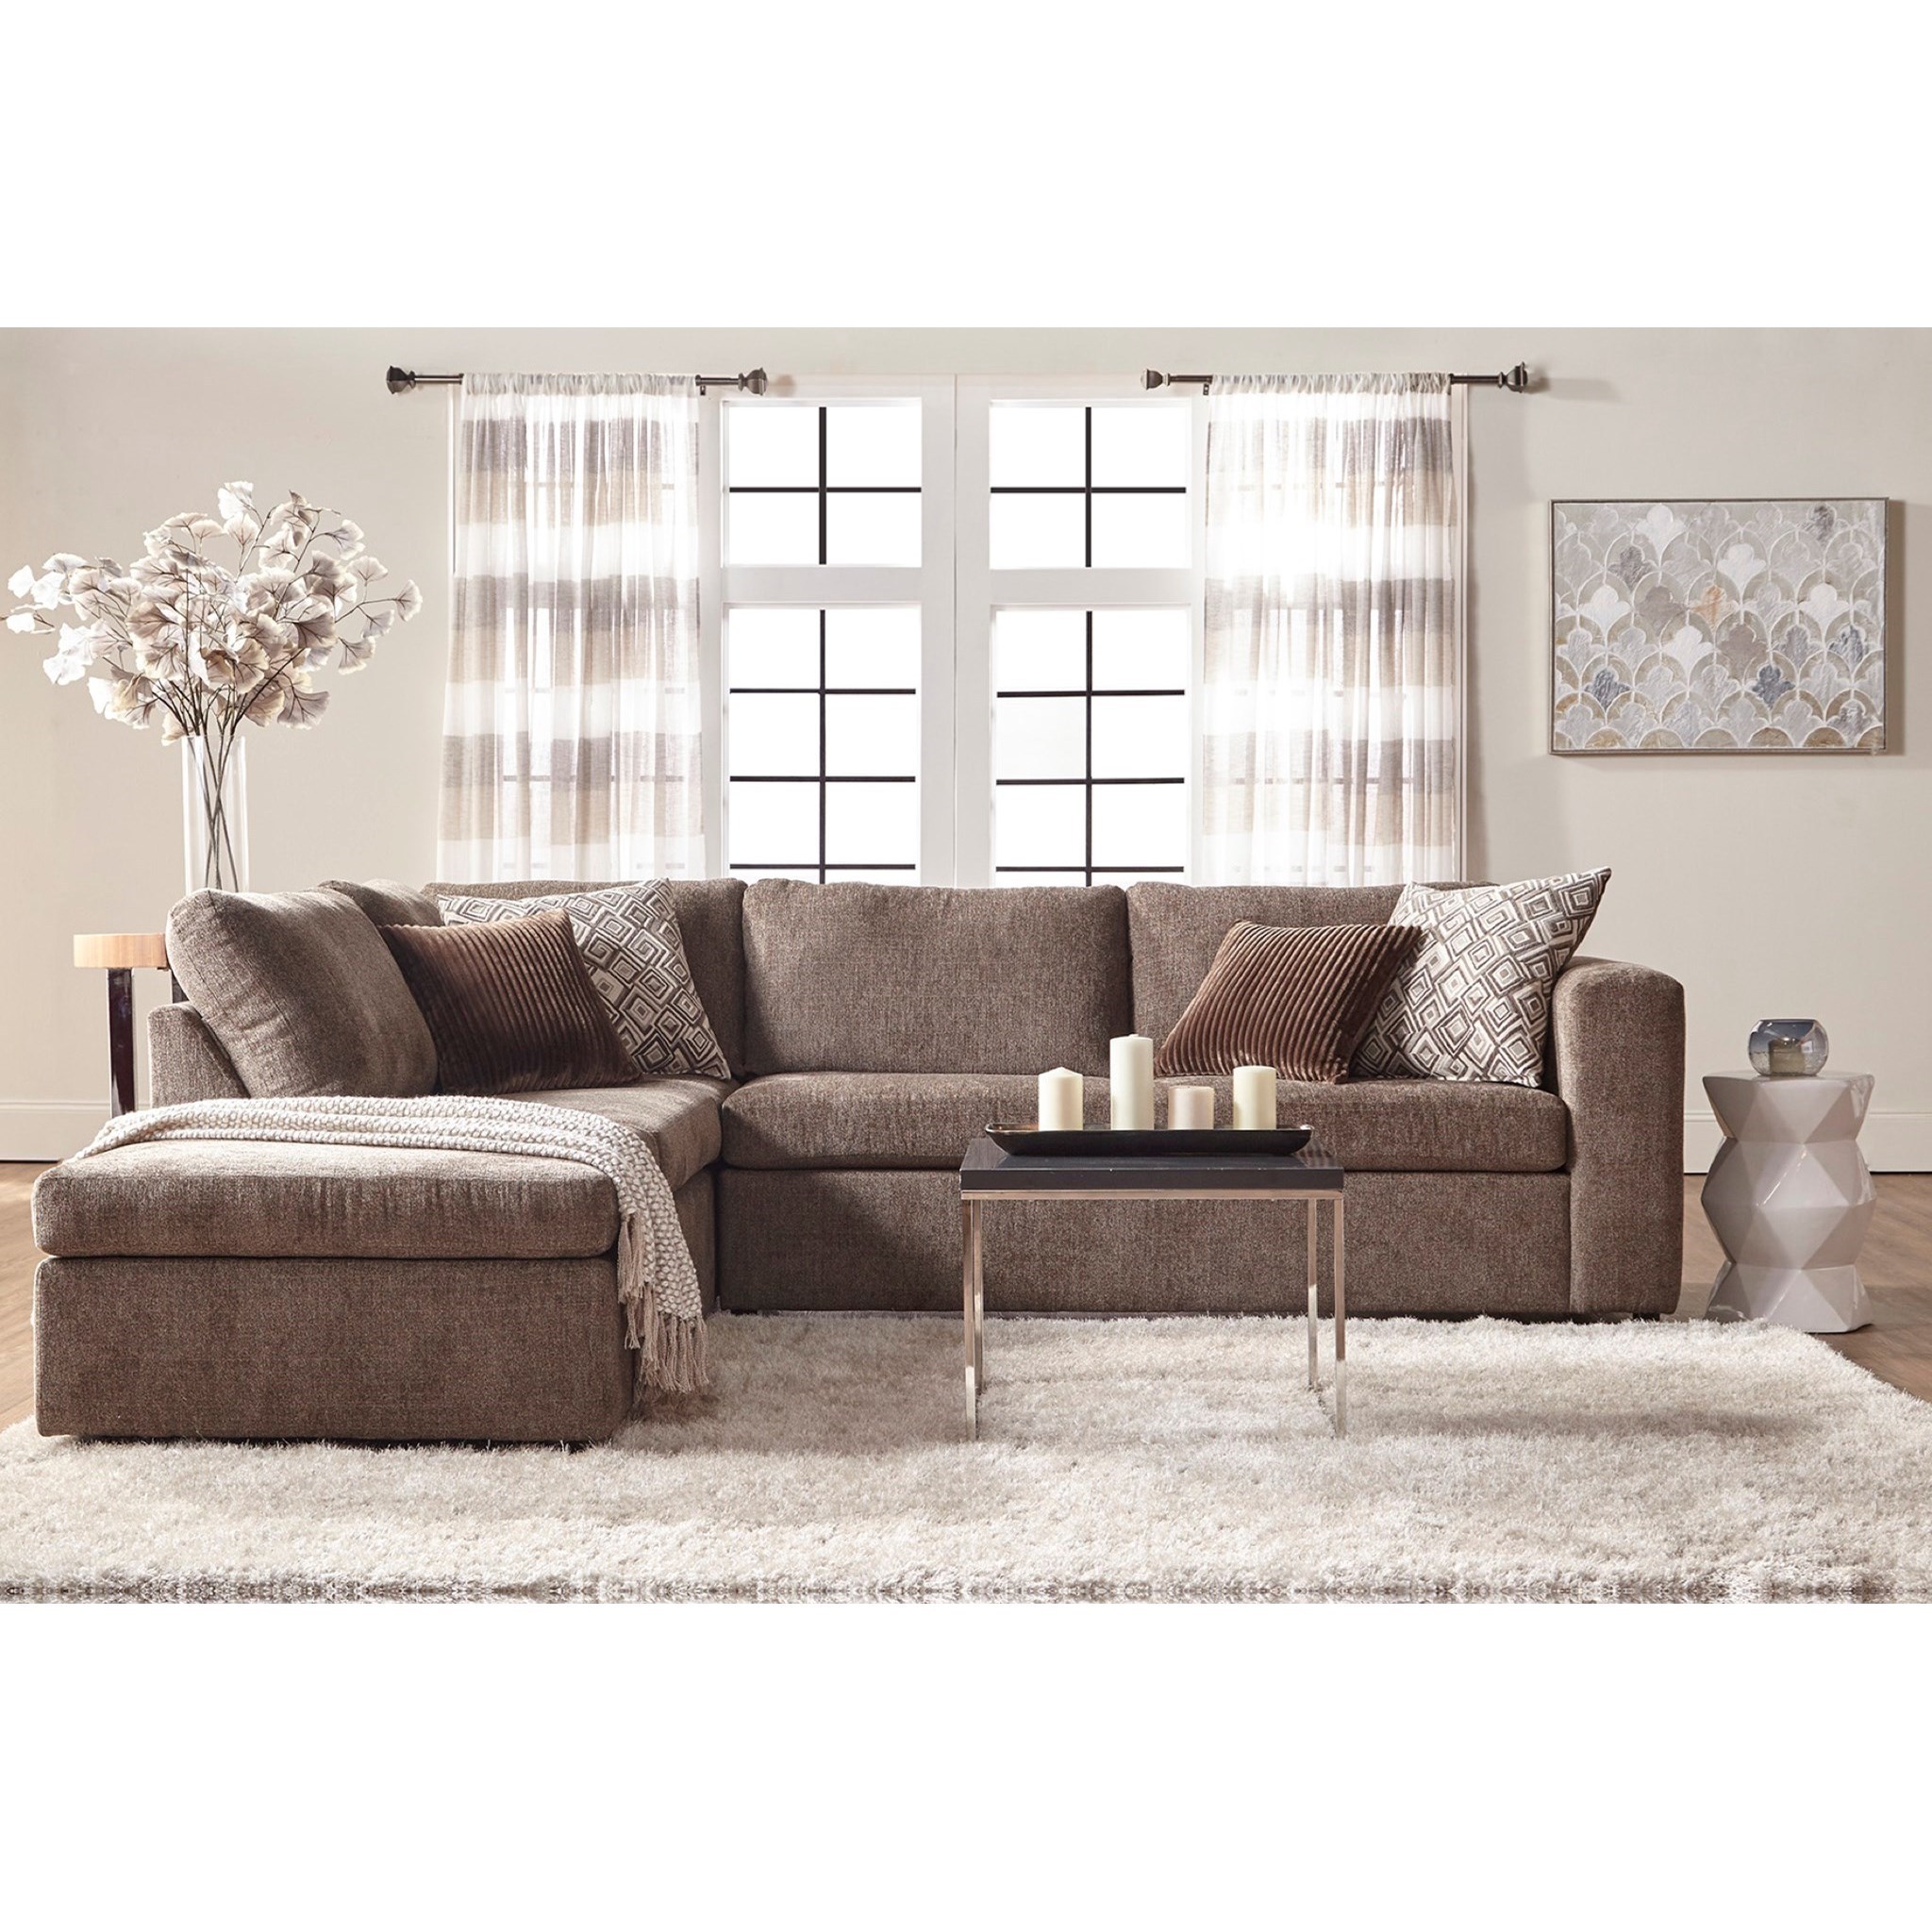 Angora Casual Contemporary Sectional Sofa with Chaise by Serta Upholstery